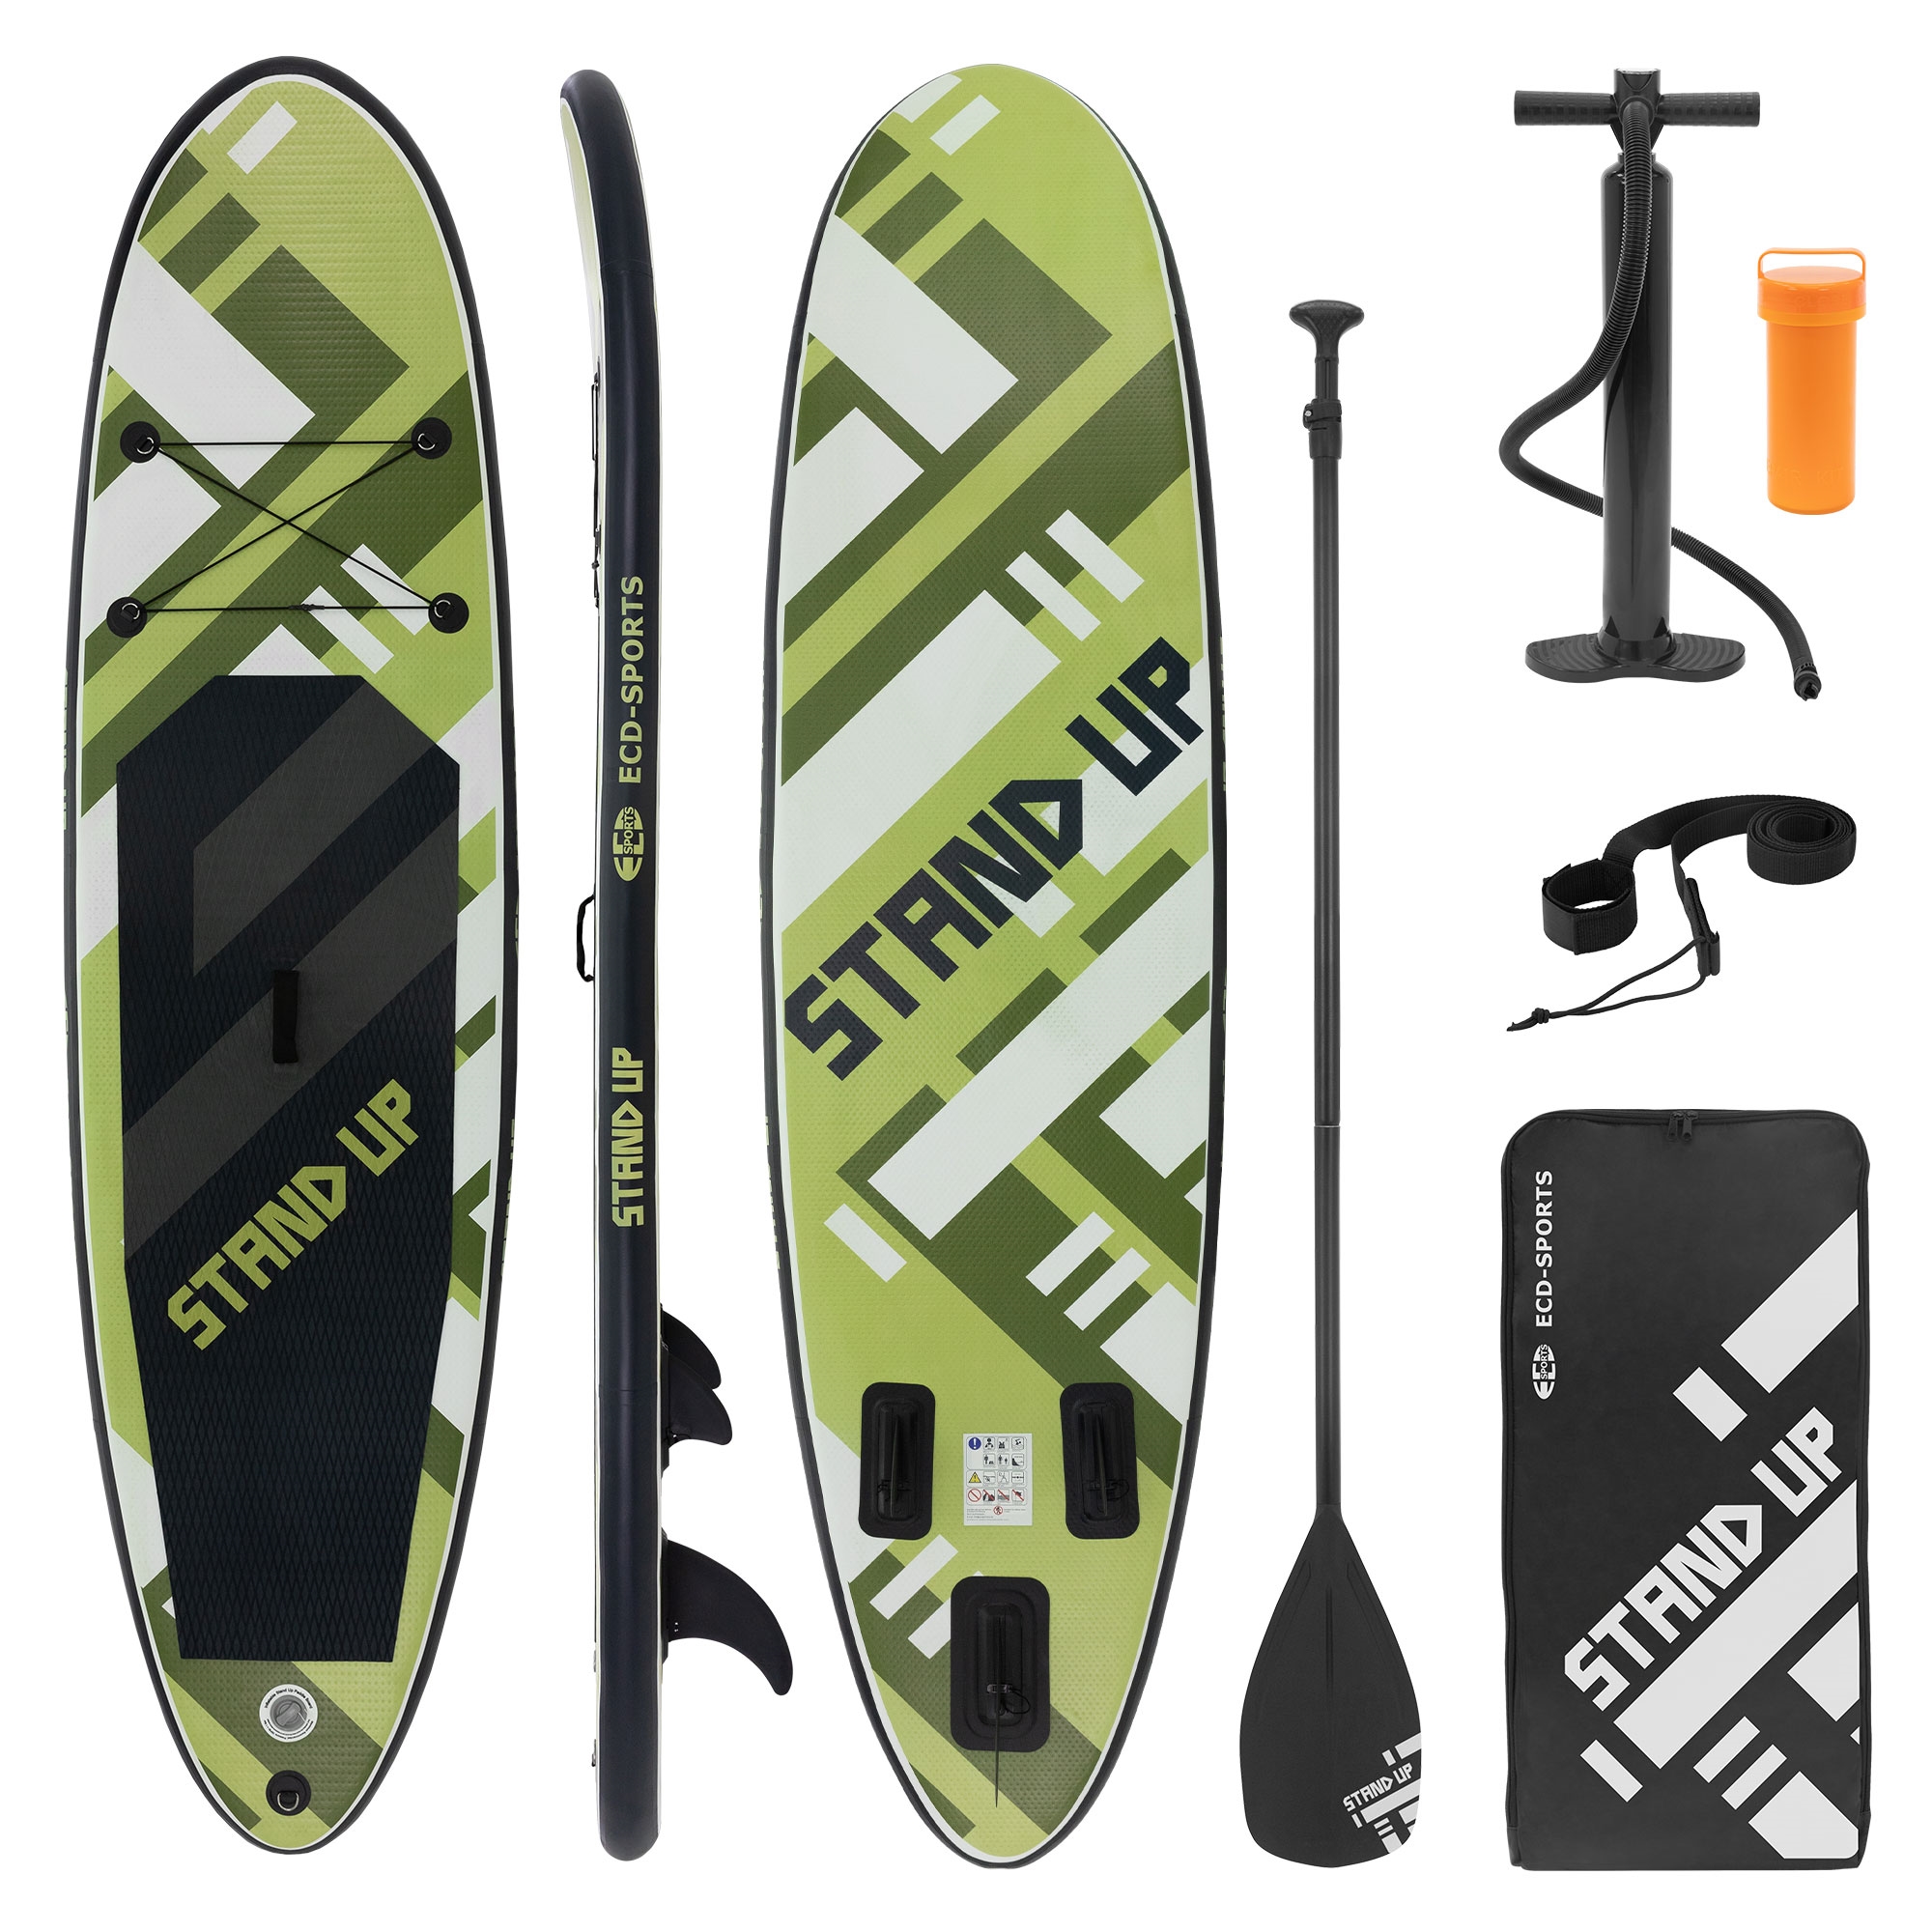 Tabla De Stand Up Paddle Inflable 308x78x10 Cm - verde-oliva - 